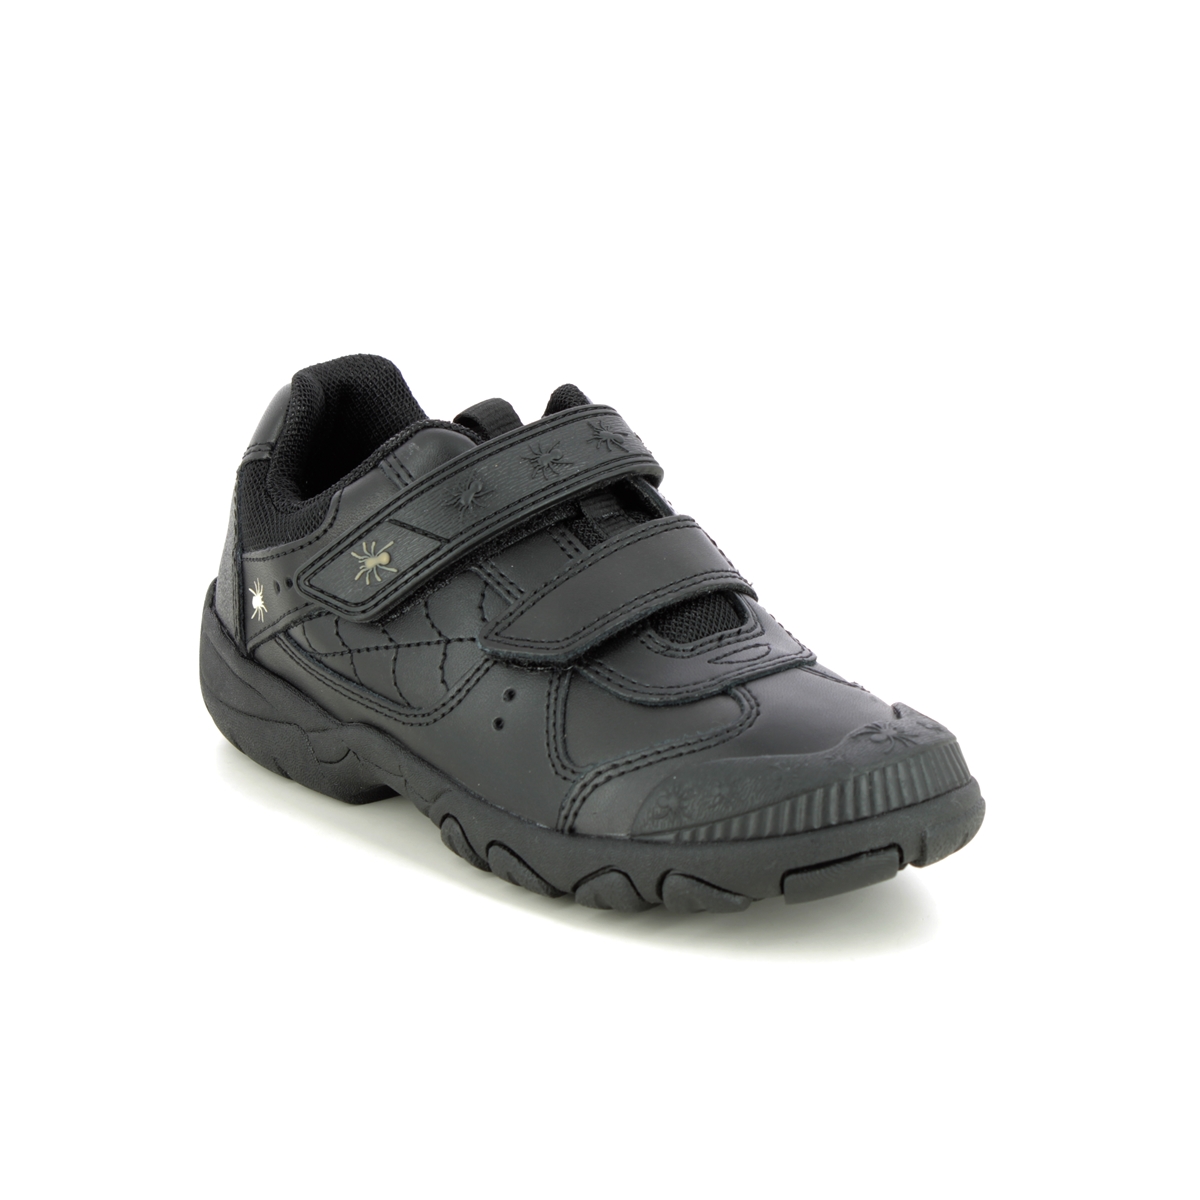 Start Rite - Tarantula In Black Leather 2272-76F In Size 12 In Plain Black Leather For School Boys Shoes  In Black Leather For kids